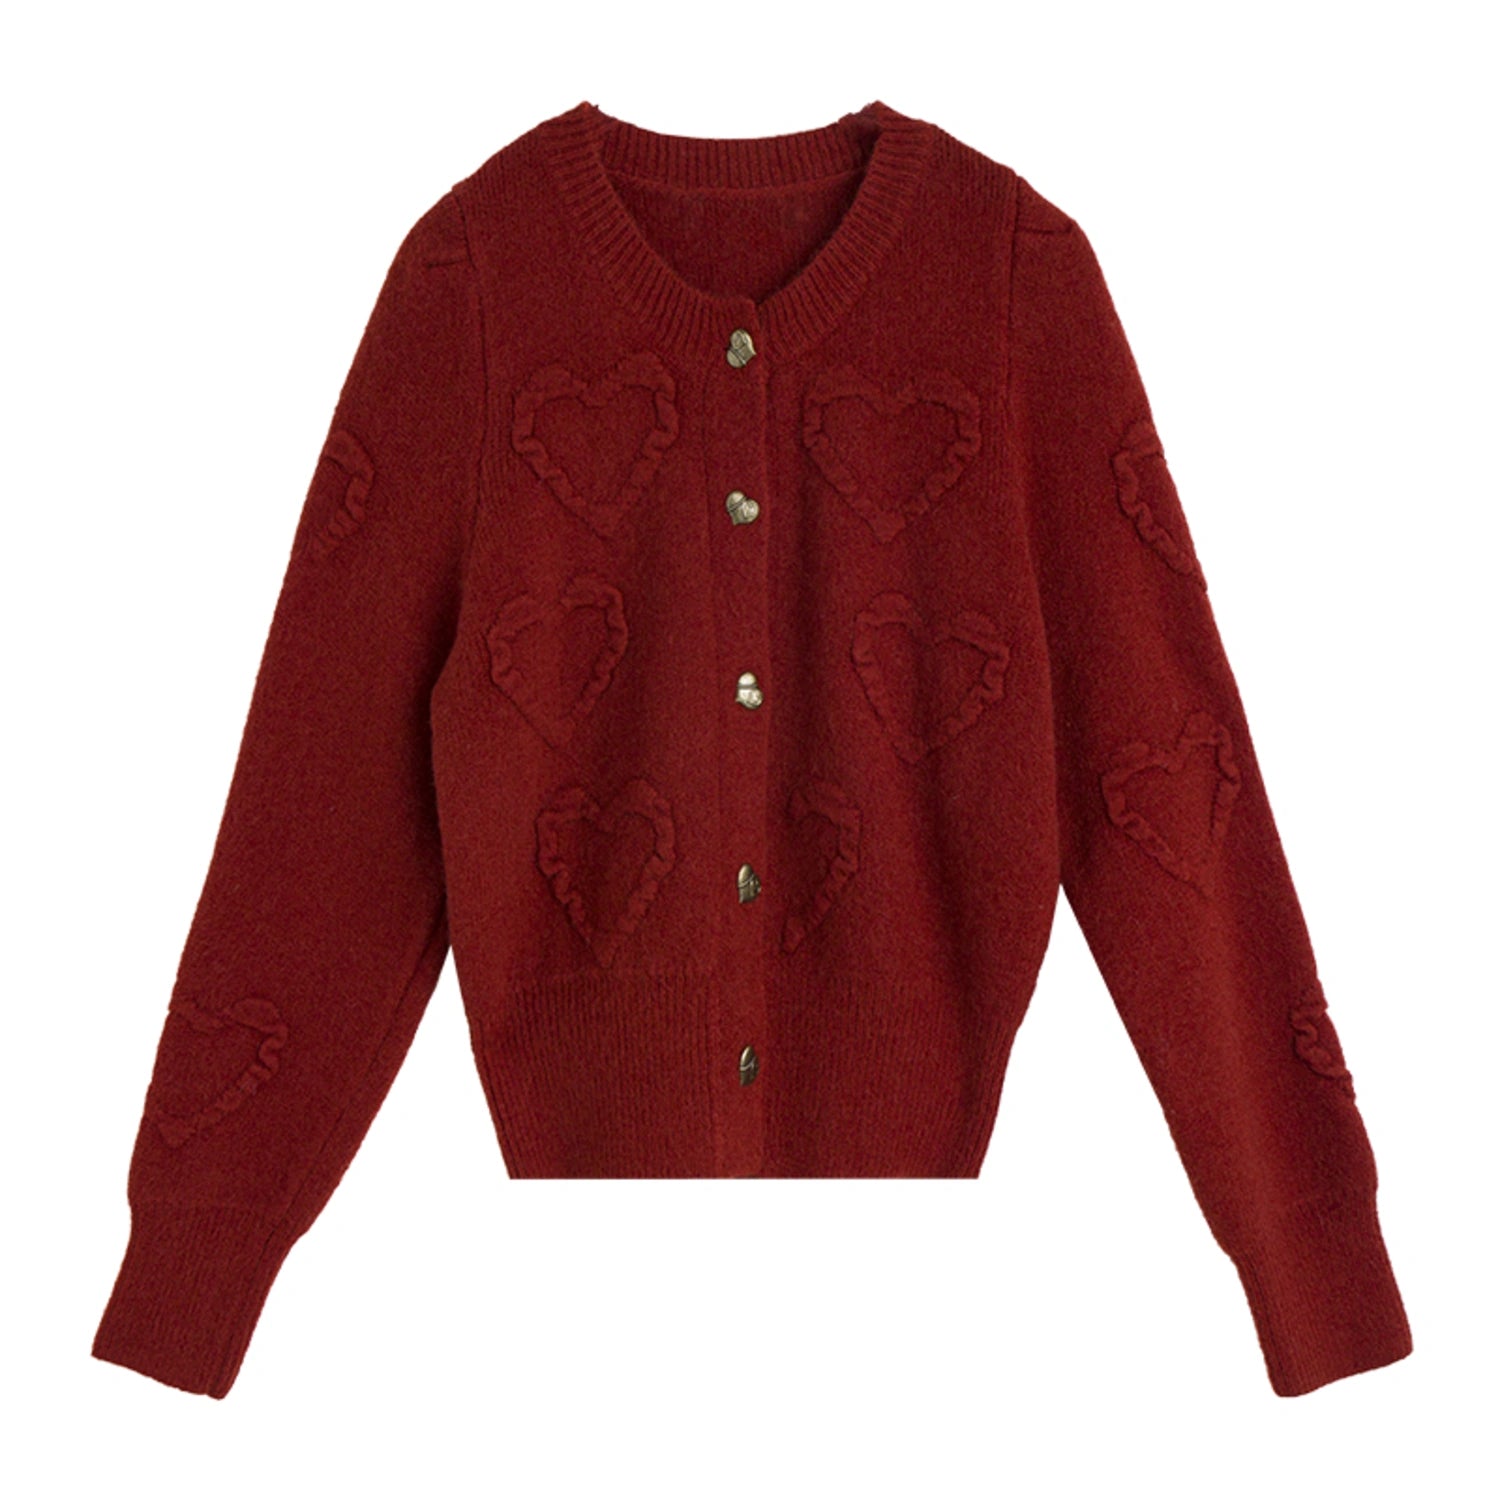 Embossed Heart Pattern Cardigan with Vintage-Inspired Buttons